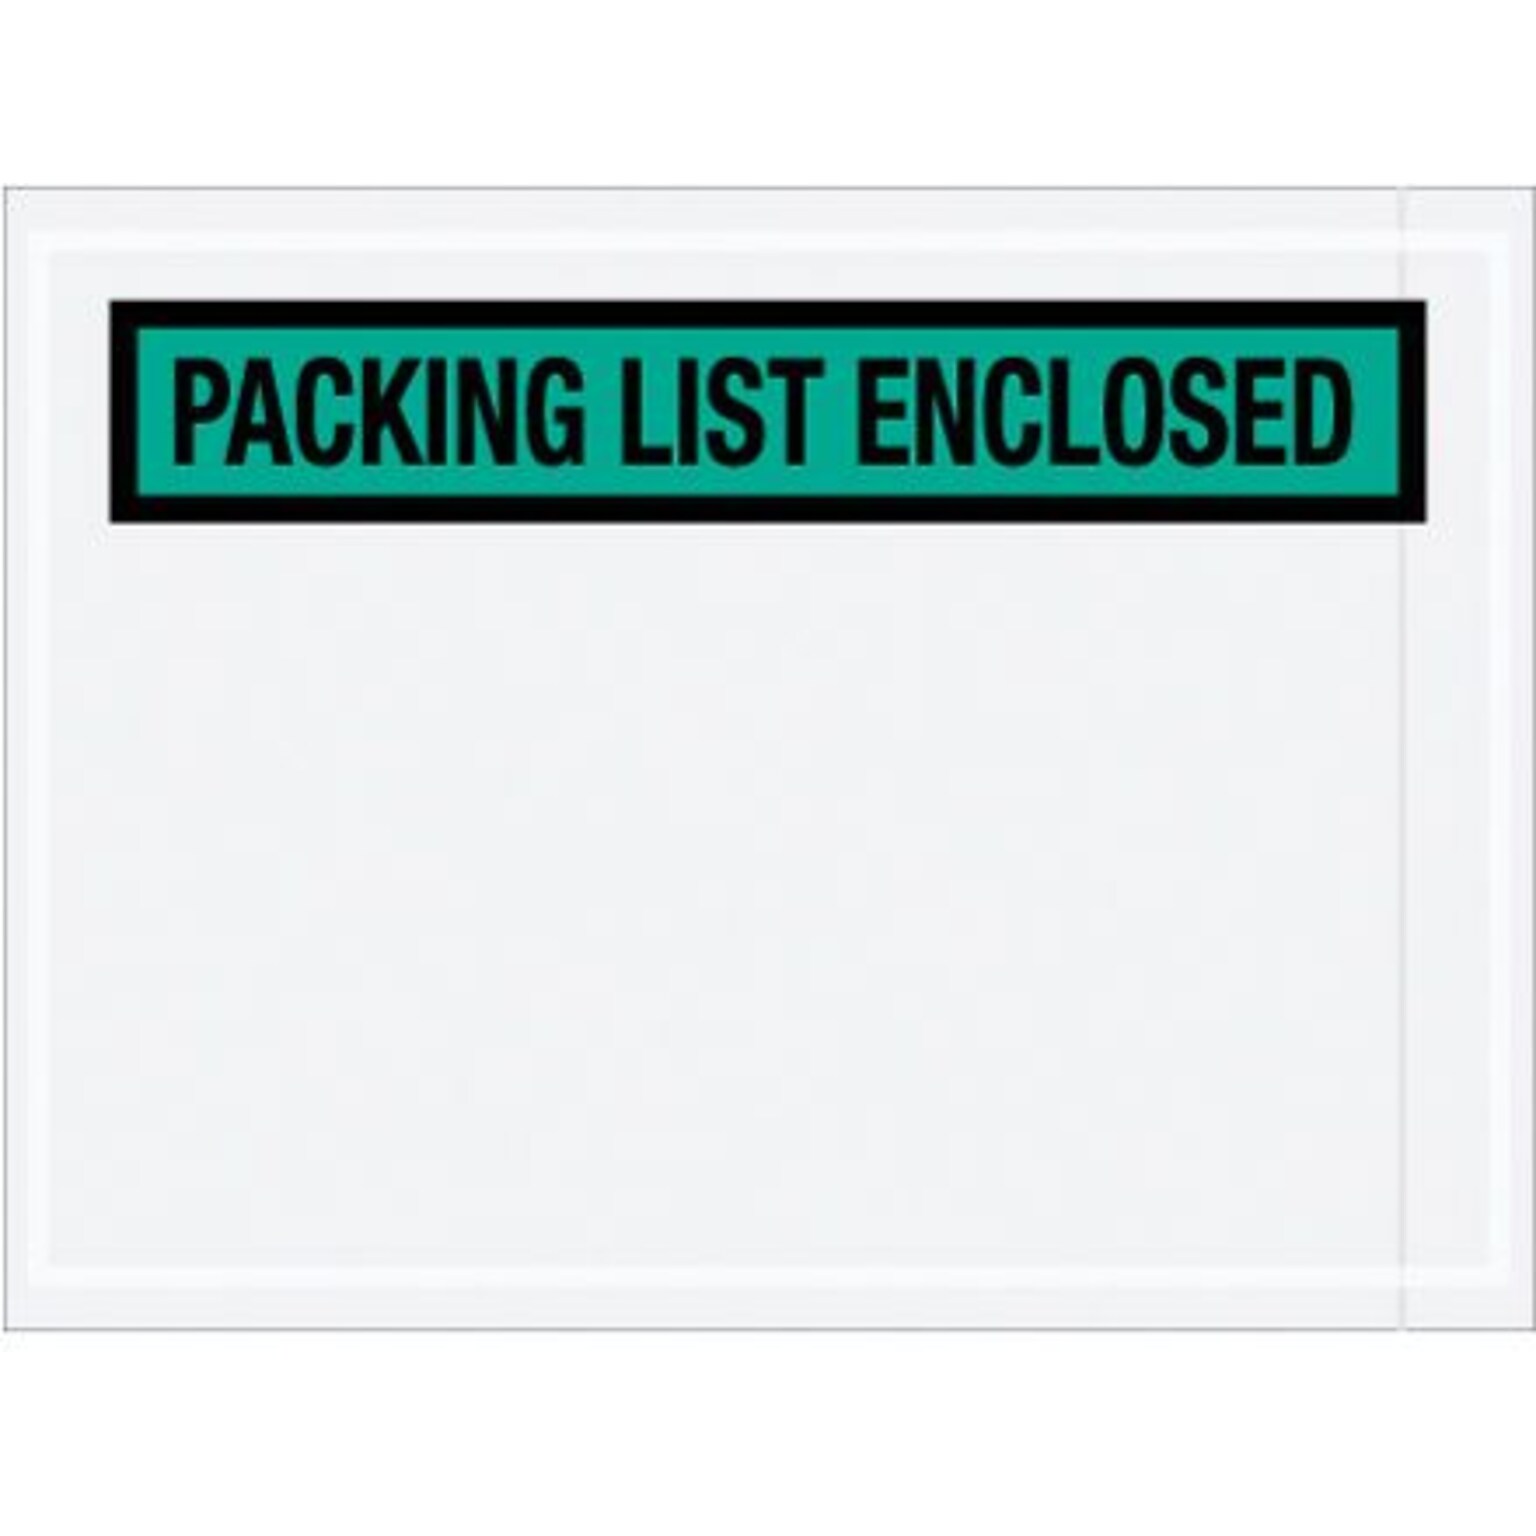 Quill Brand Packing List Envelope, 4.5 x 6, Green Panel Face, Packing List Enclosed, 1000/Case (PL489)